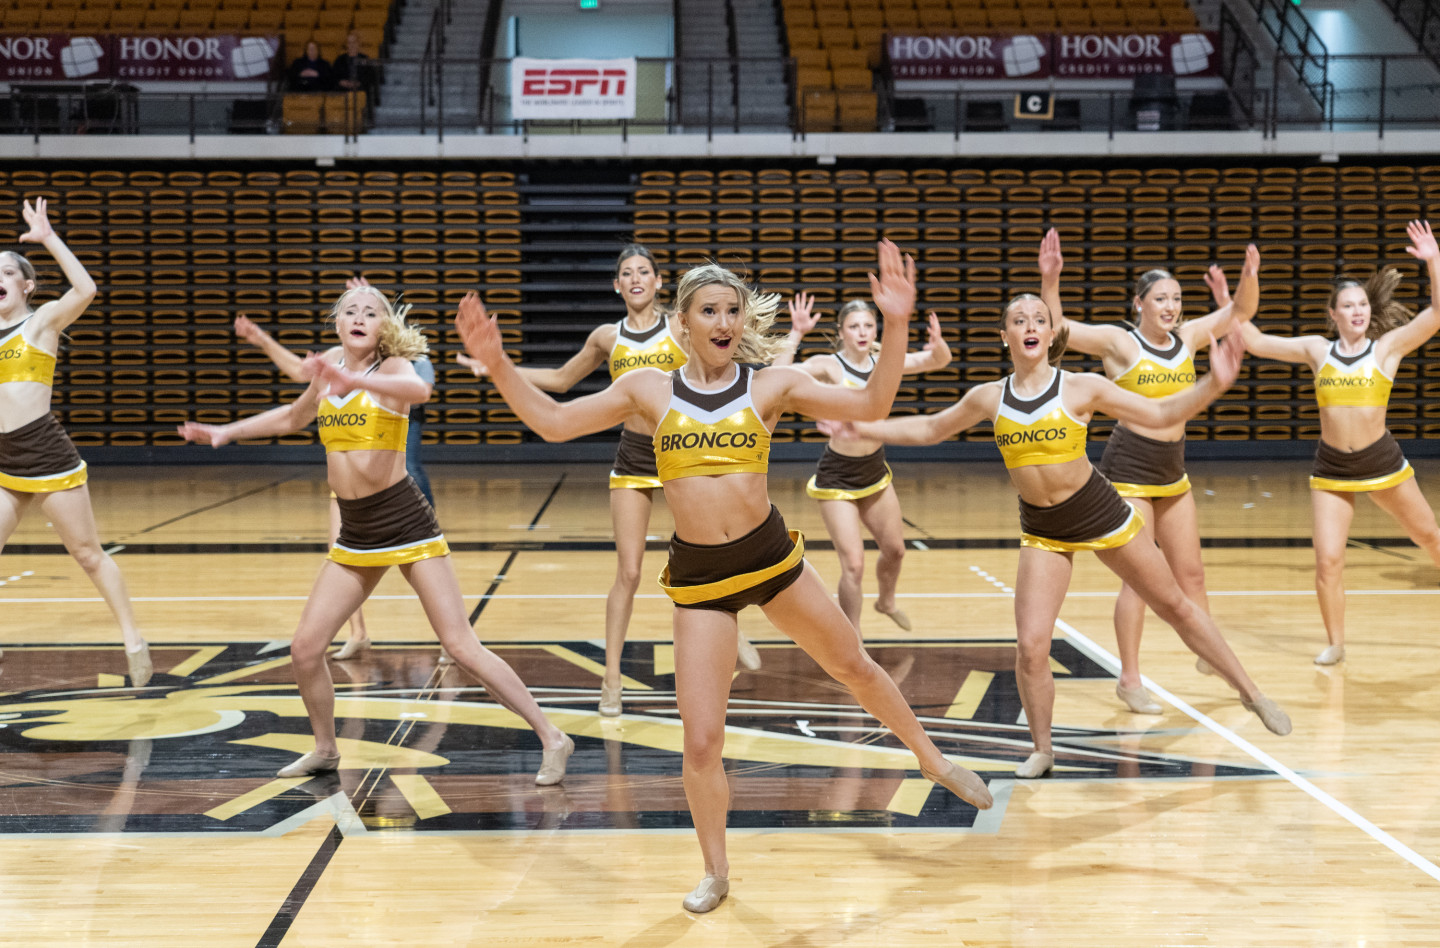 Dance team members perform a routine.